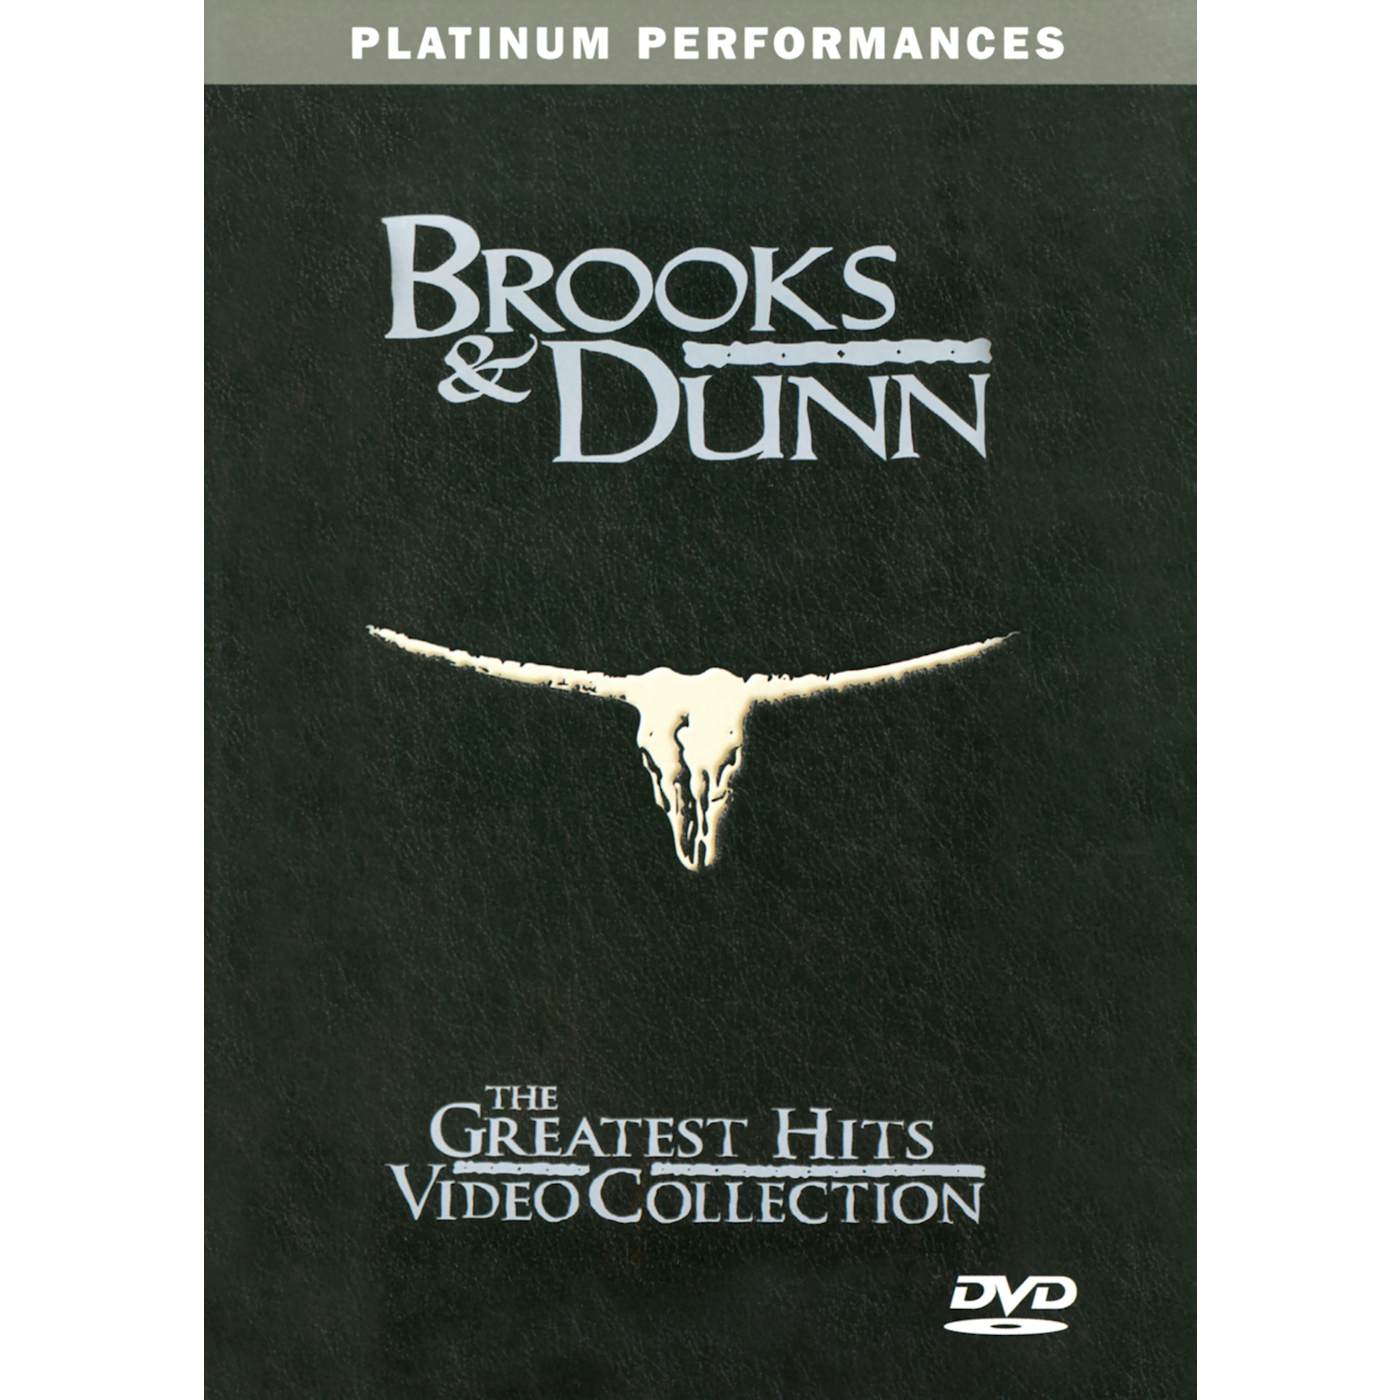 Brooks & Dunn GREATEST HITS VIDEO COLLECTION DVD